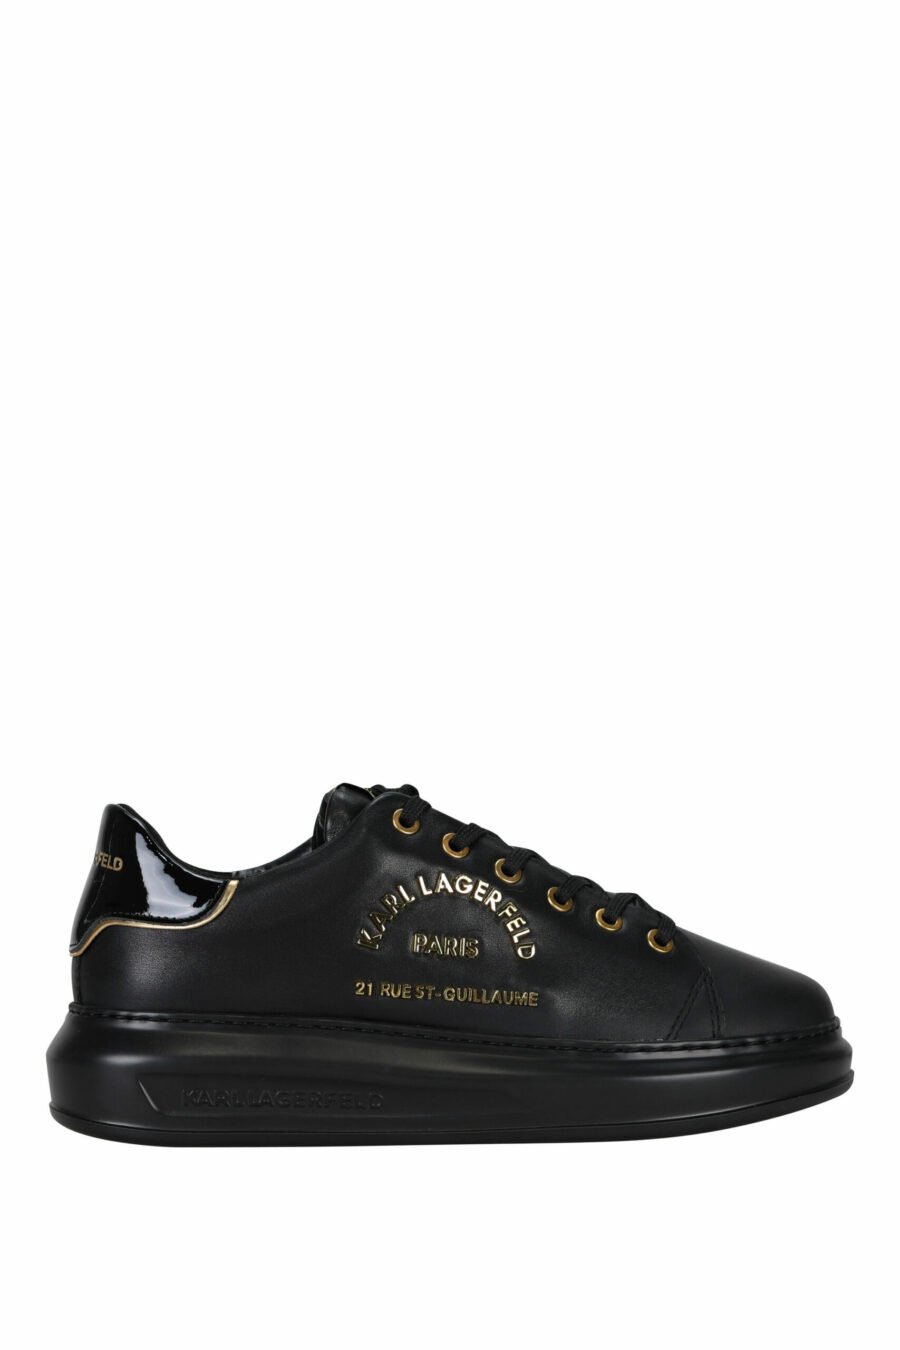 Black trainers with golden "rue st guillaume" logo in metal - 5059529362699 scaled